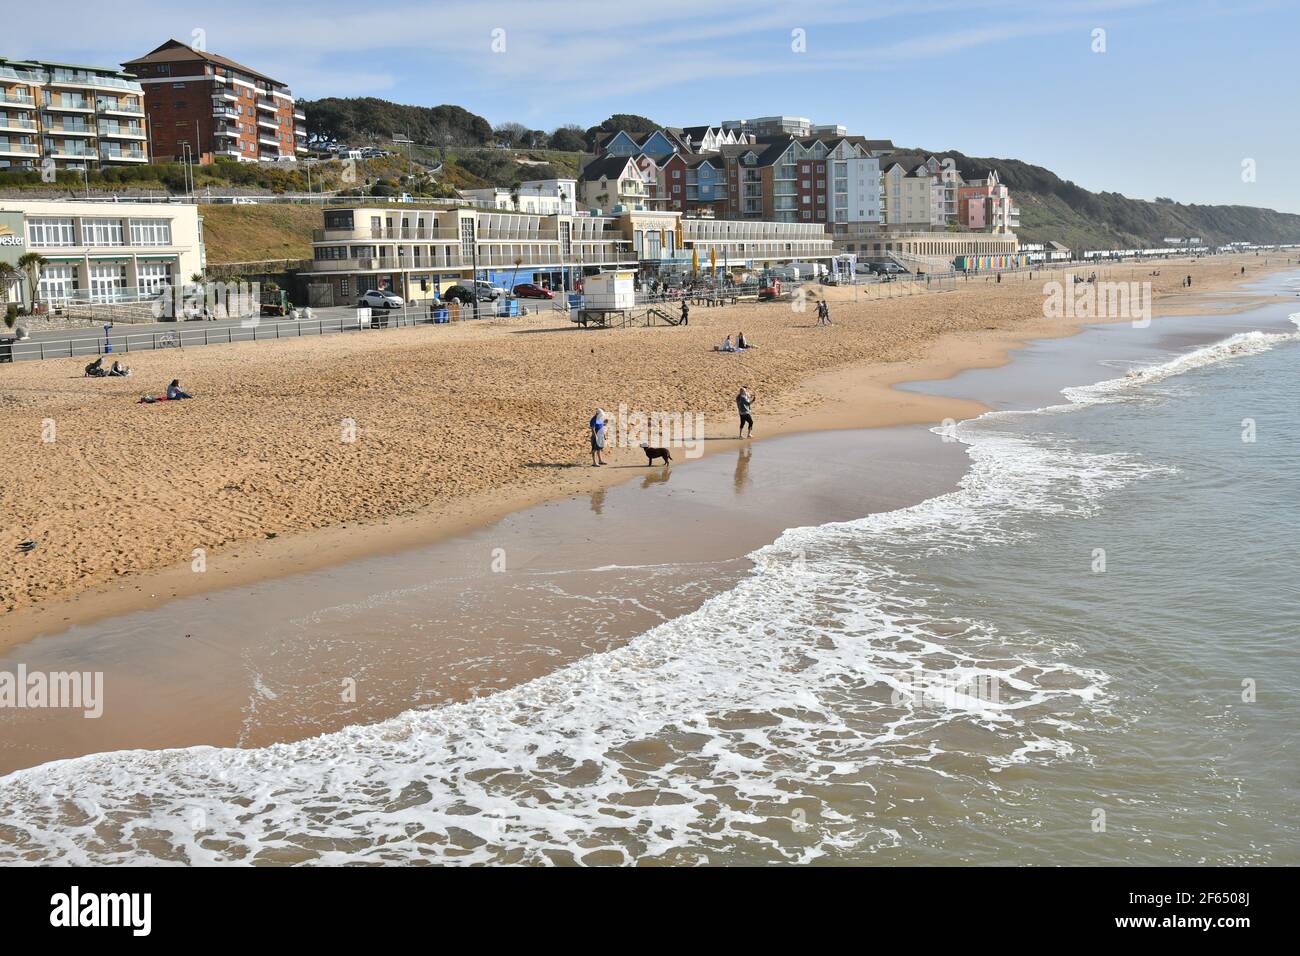 Boscombe, Bournemouth, Dorset, UK, 30th March 2021, Weather. An early spring heatwave coincides with the relaxing of coronavirus restrictions which now allow up to six people from two households to meet outdoors. People head out to the beach as temperatures are widely expected to reach or exceed 20 degrees, several degrees above the average for late March. Credit: Paul Biggins/Alamy Live News Stock Photo